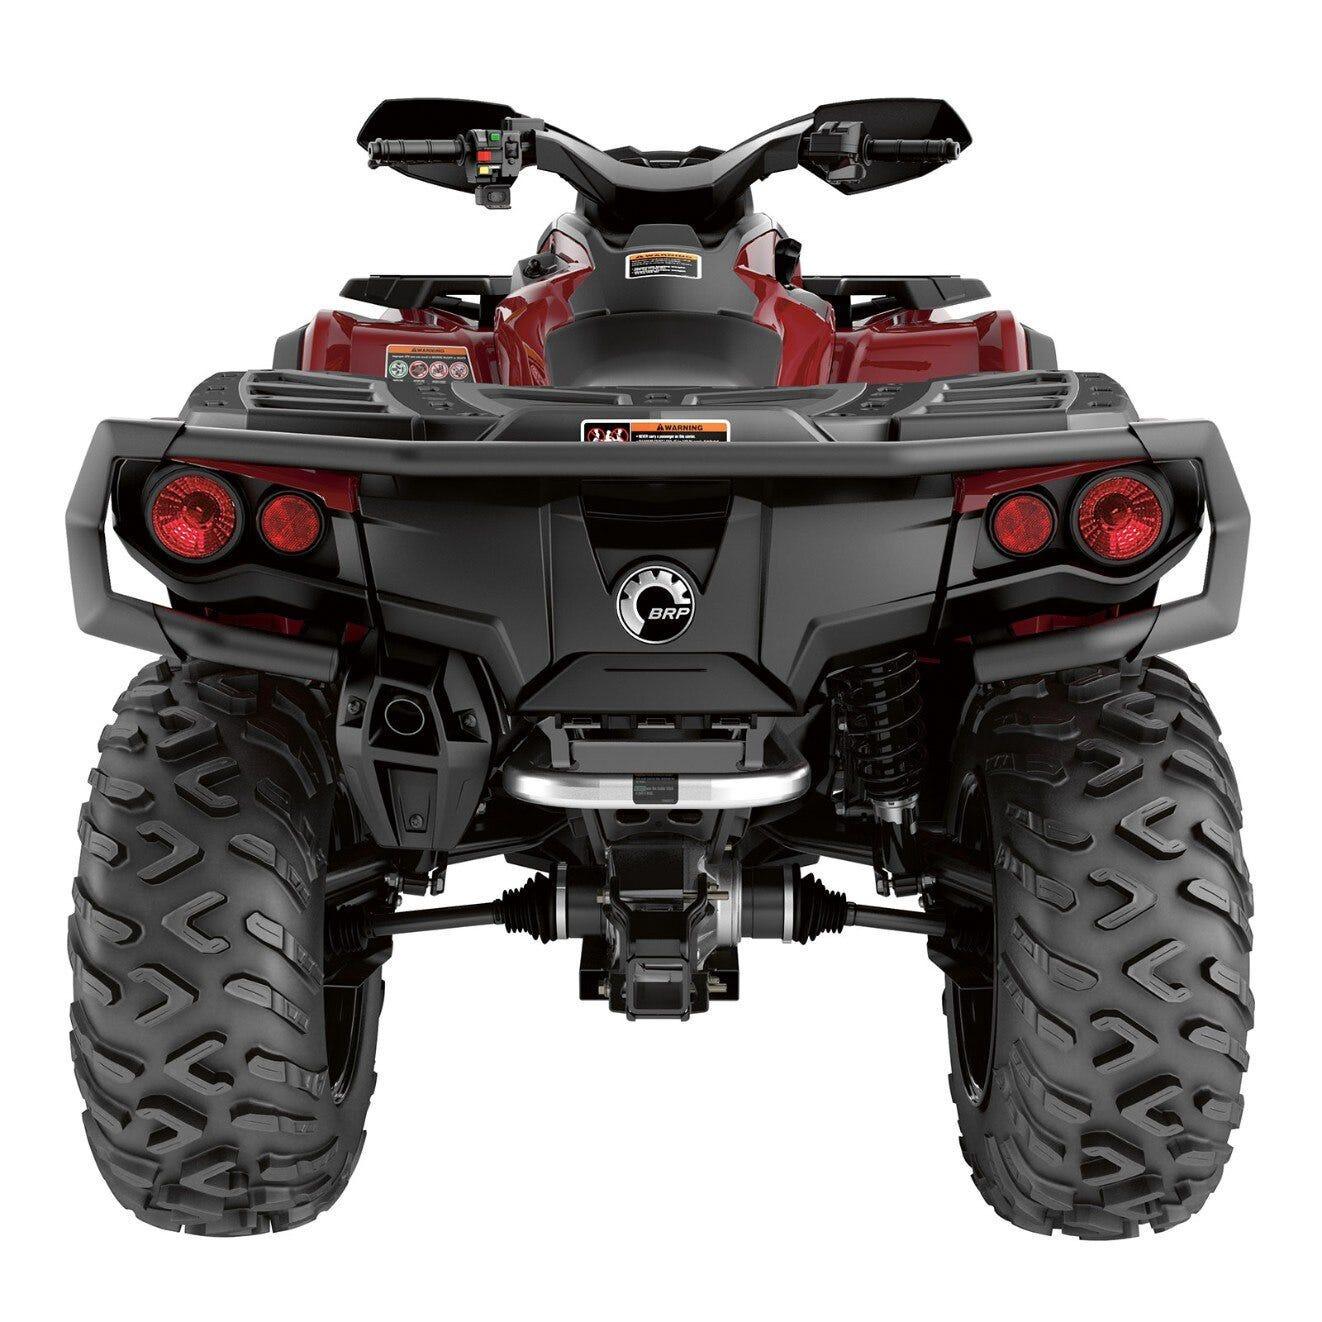 Shop Can-Am ATV Protection at Factory Recreation | Factory Recreation